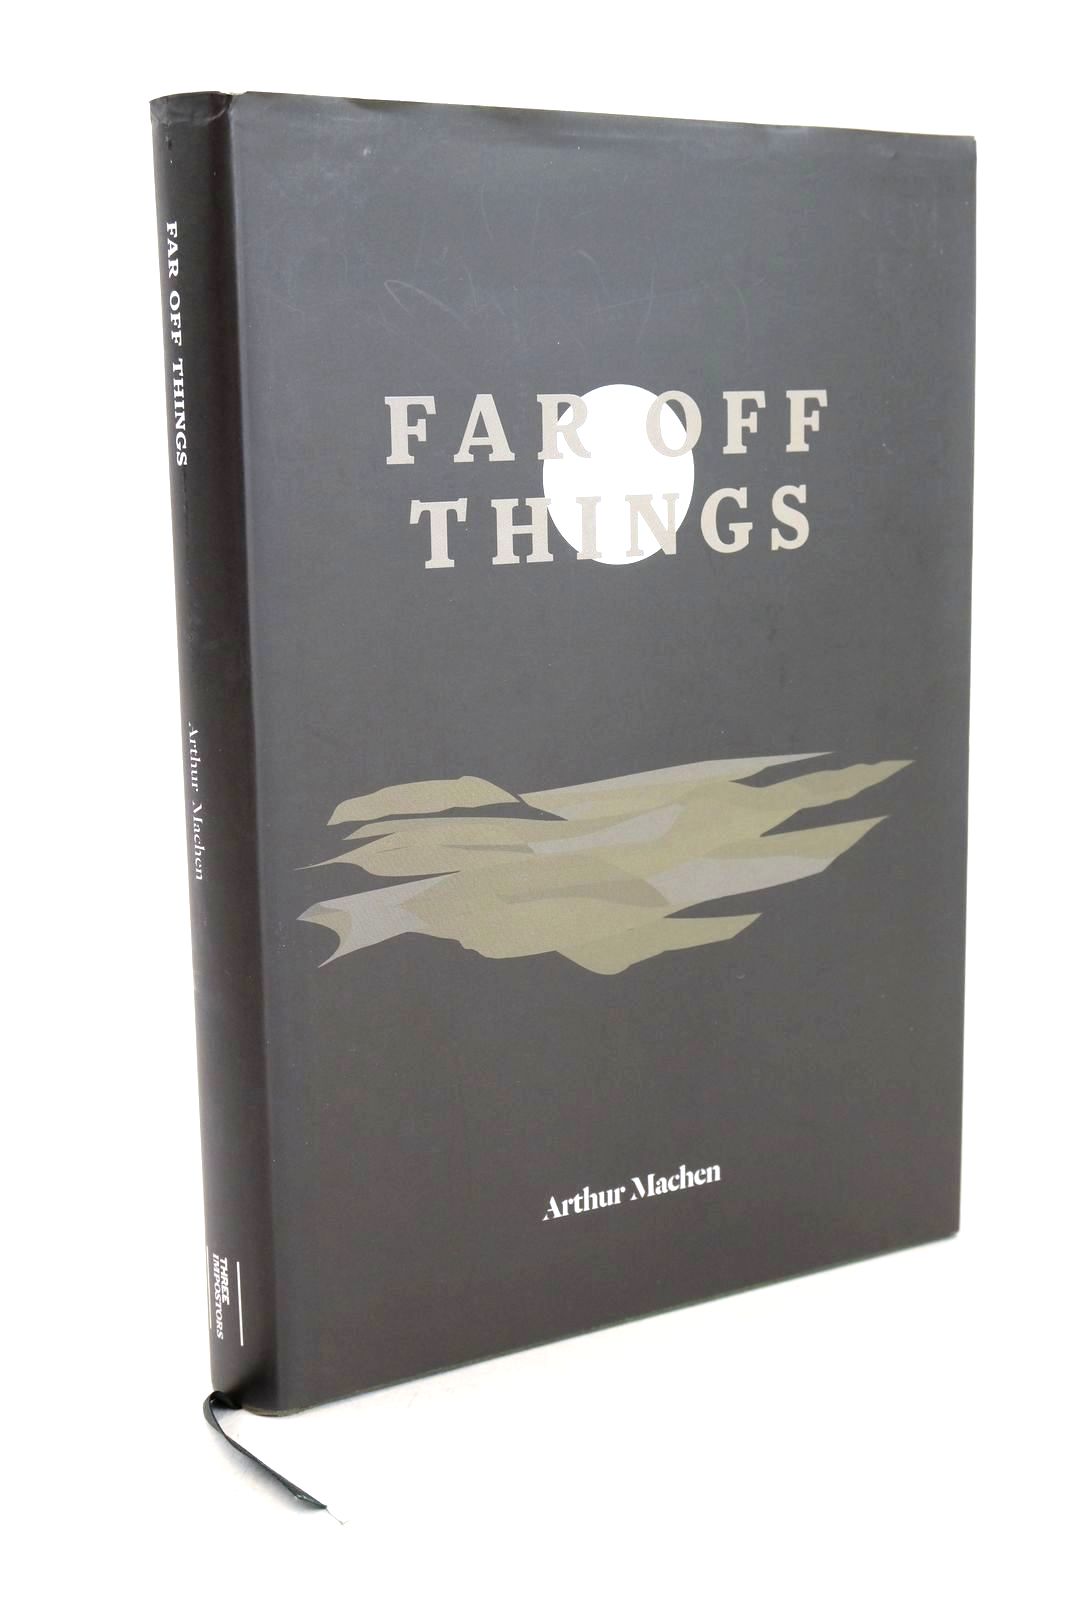 Photo of FAR OFF THINGS written by Machen, Arthur published by Three Imposters (STOCK CODE: 1326910)  for sale by Stella & Rose's Books